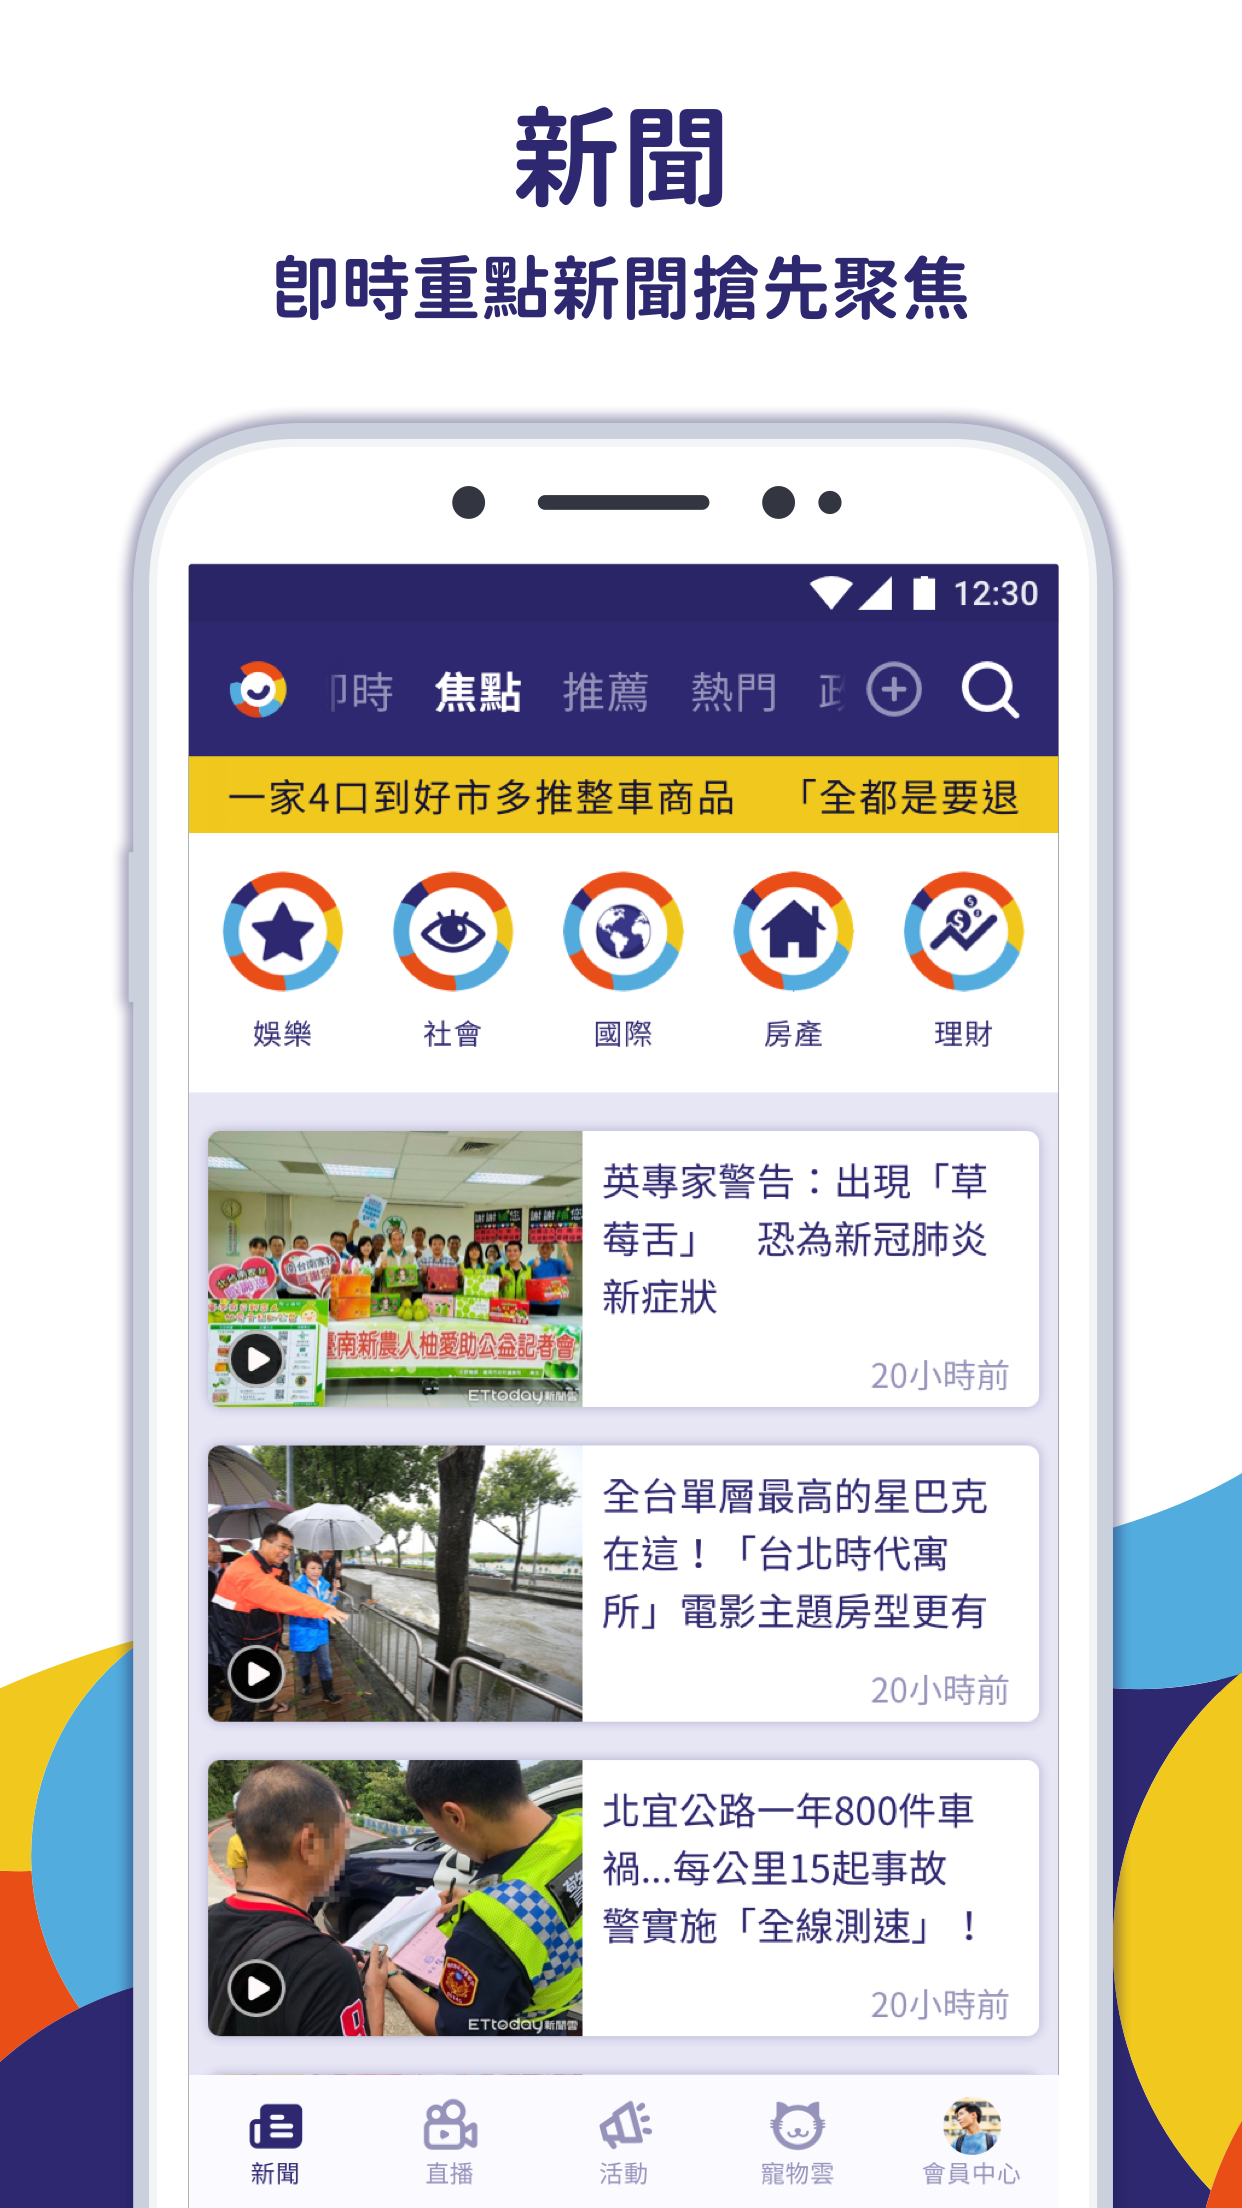 Android application ETtoday新聞雲 screenshort